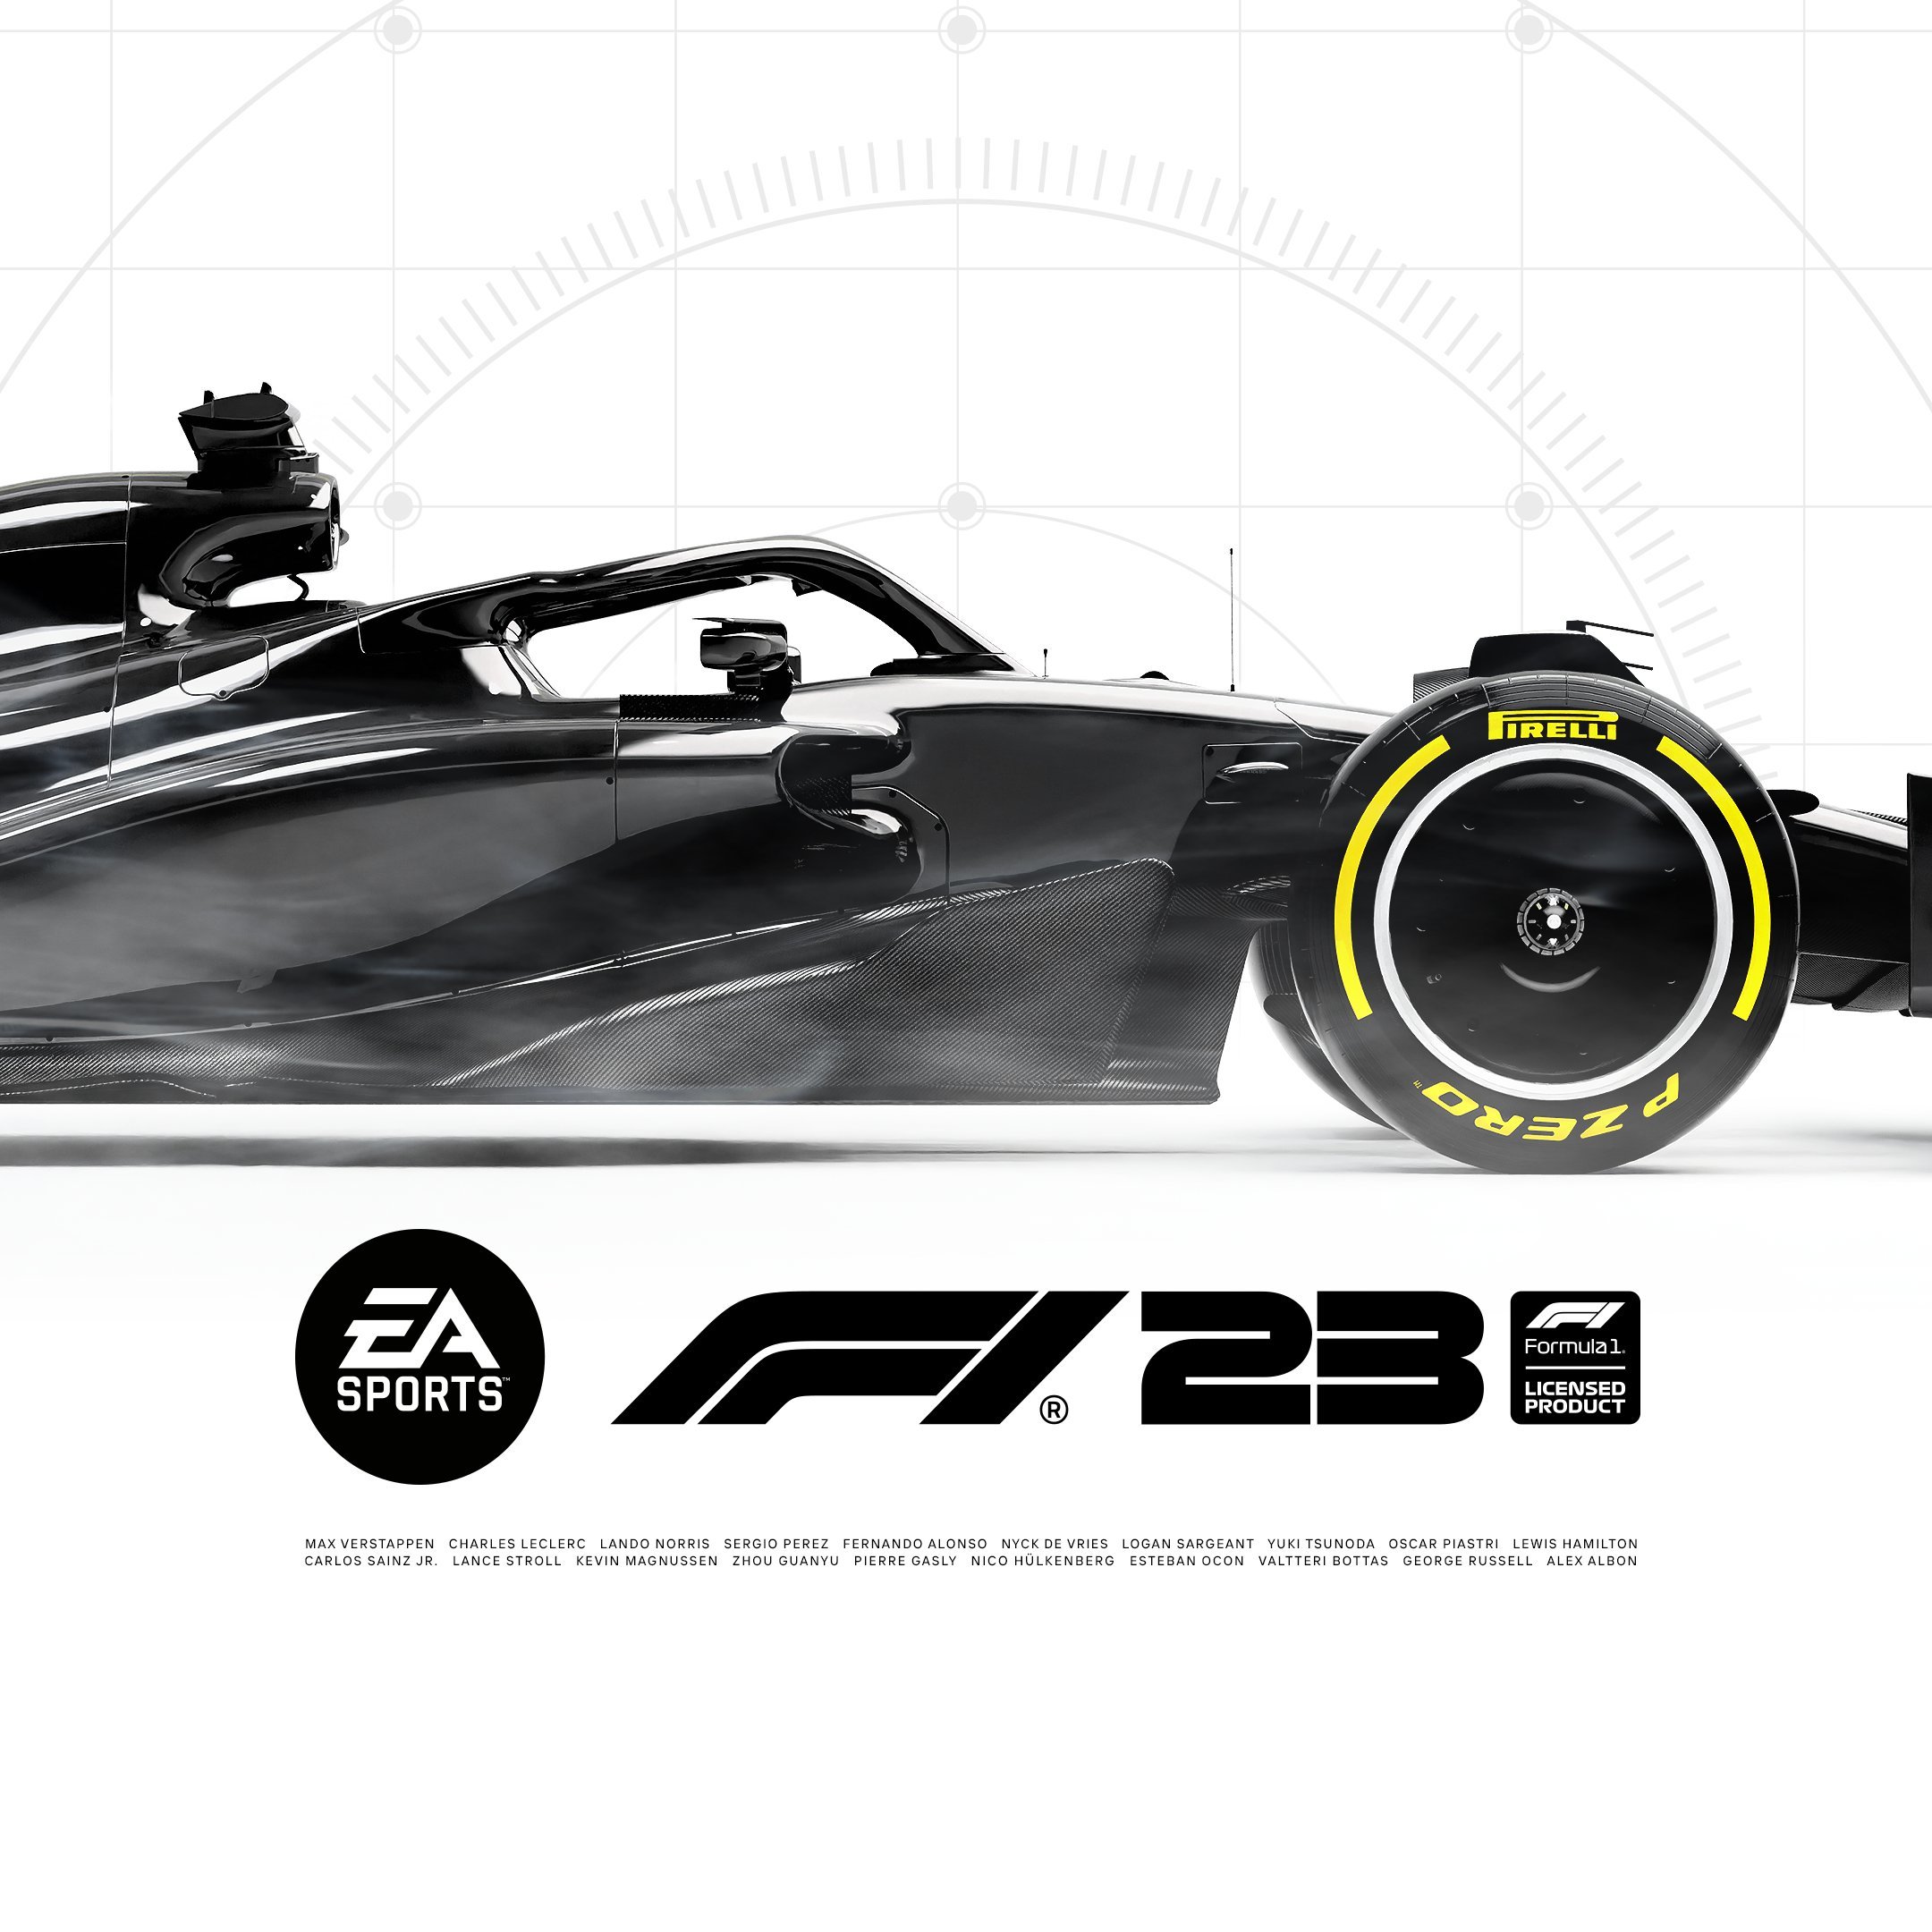 Is EA letting us down that F1 23 is coming?